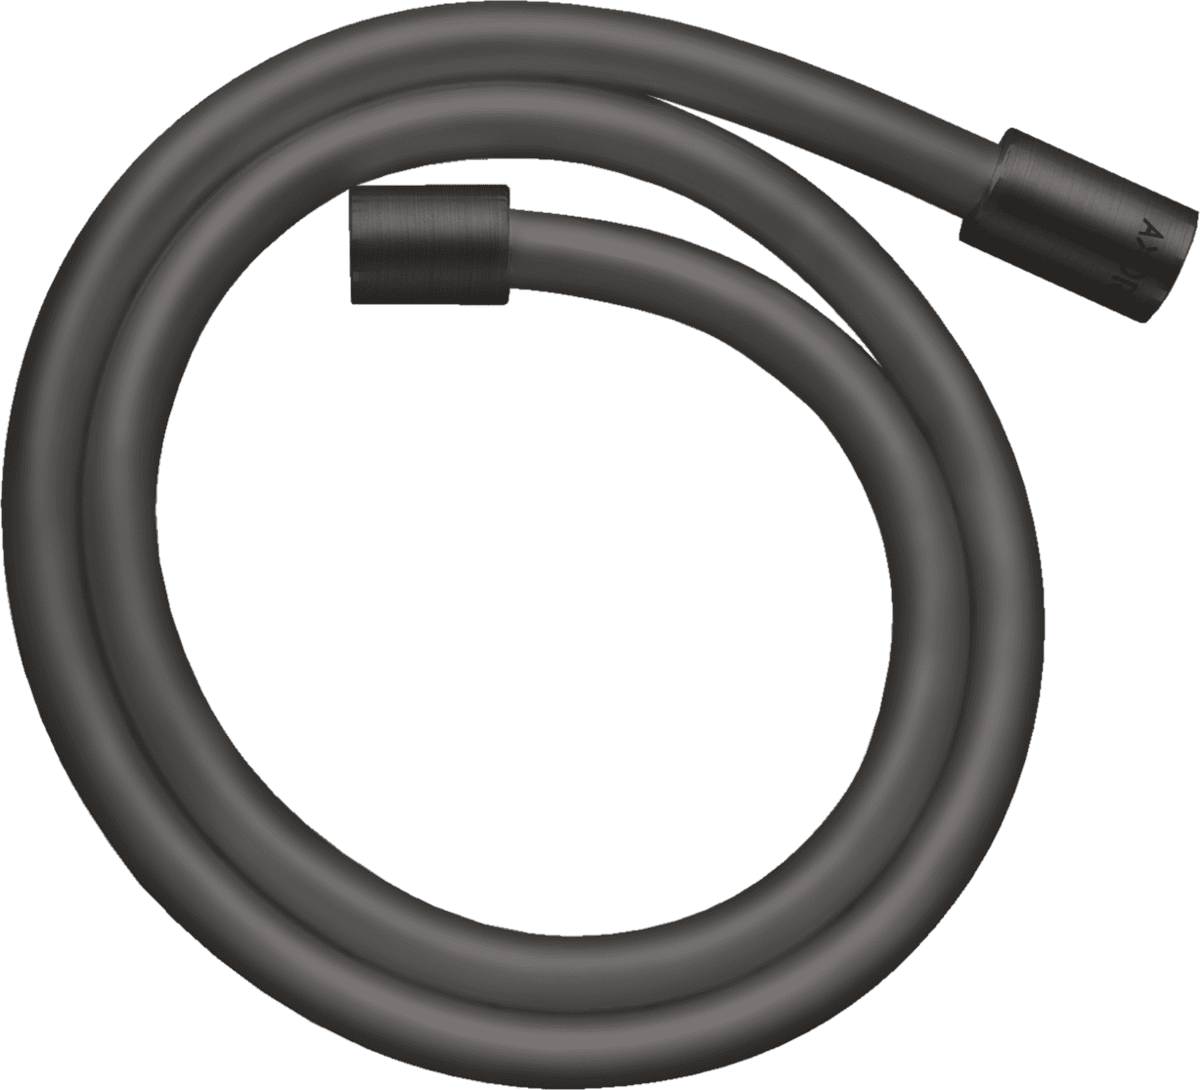 Picture of HANSGROHE AXOR Starck Metal effect shower hose 2.00 m with cylindrical nuts #28284340 - Brushed Black Chrome